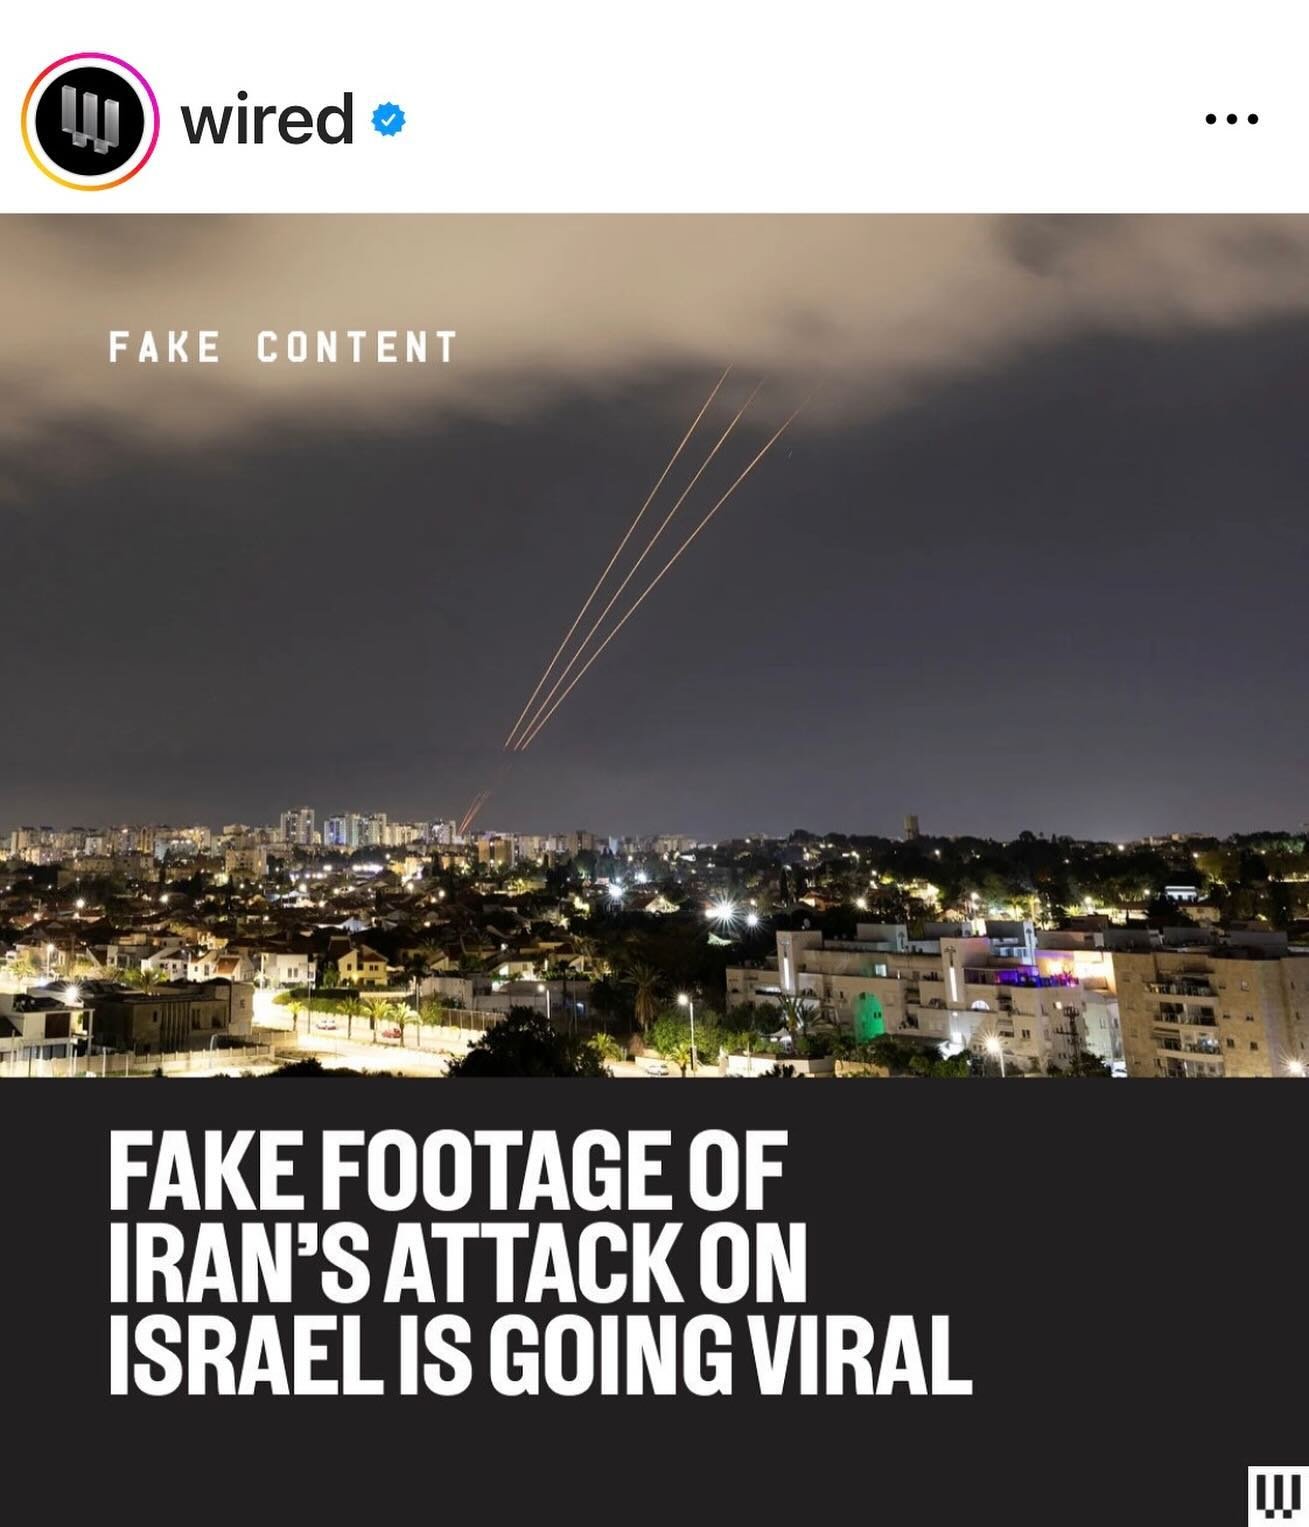 Thanks @wired for highlighting the volume of disinformation spread by verified users of X - we need professionals not pundits https://www.instagram.com/p/C5yoTCKJ147/?igsh=MWFuNXd5bjg1bjNqaA==